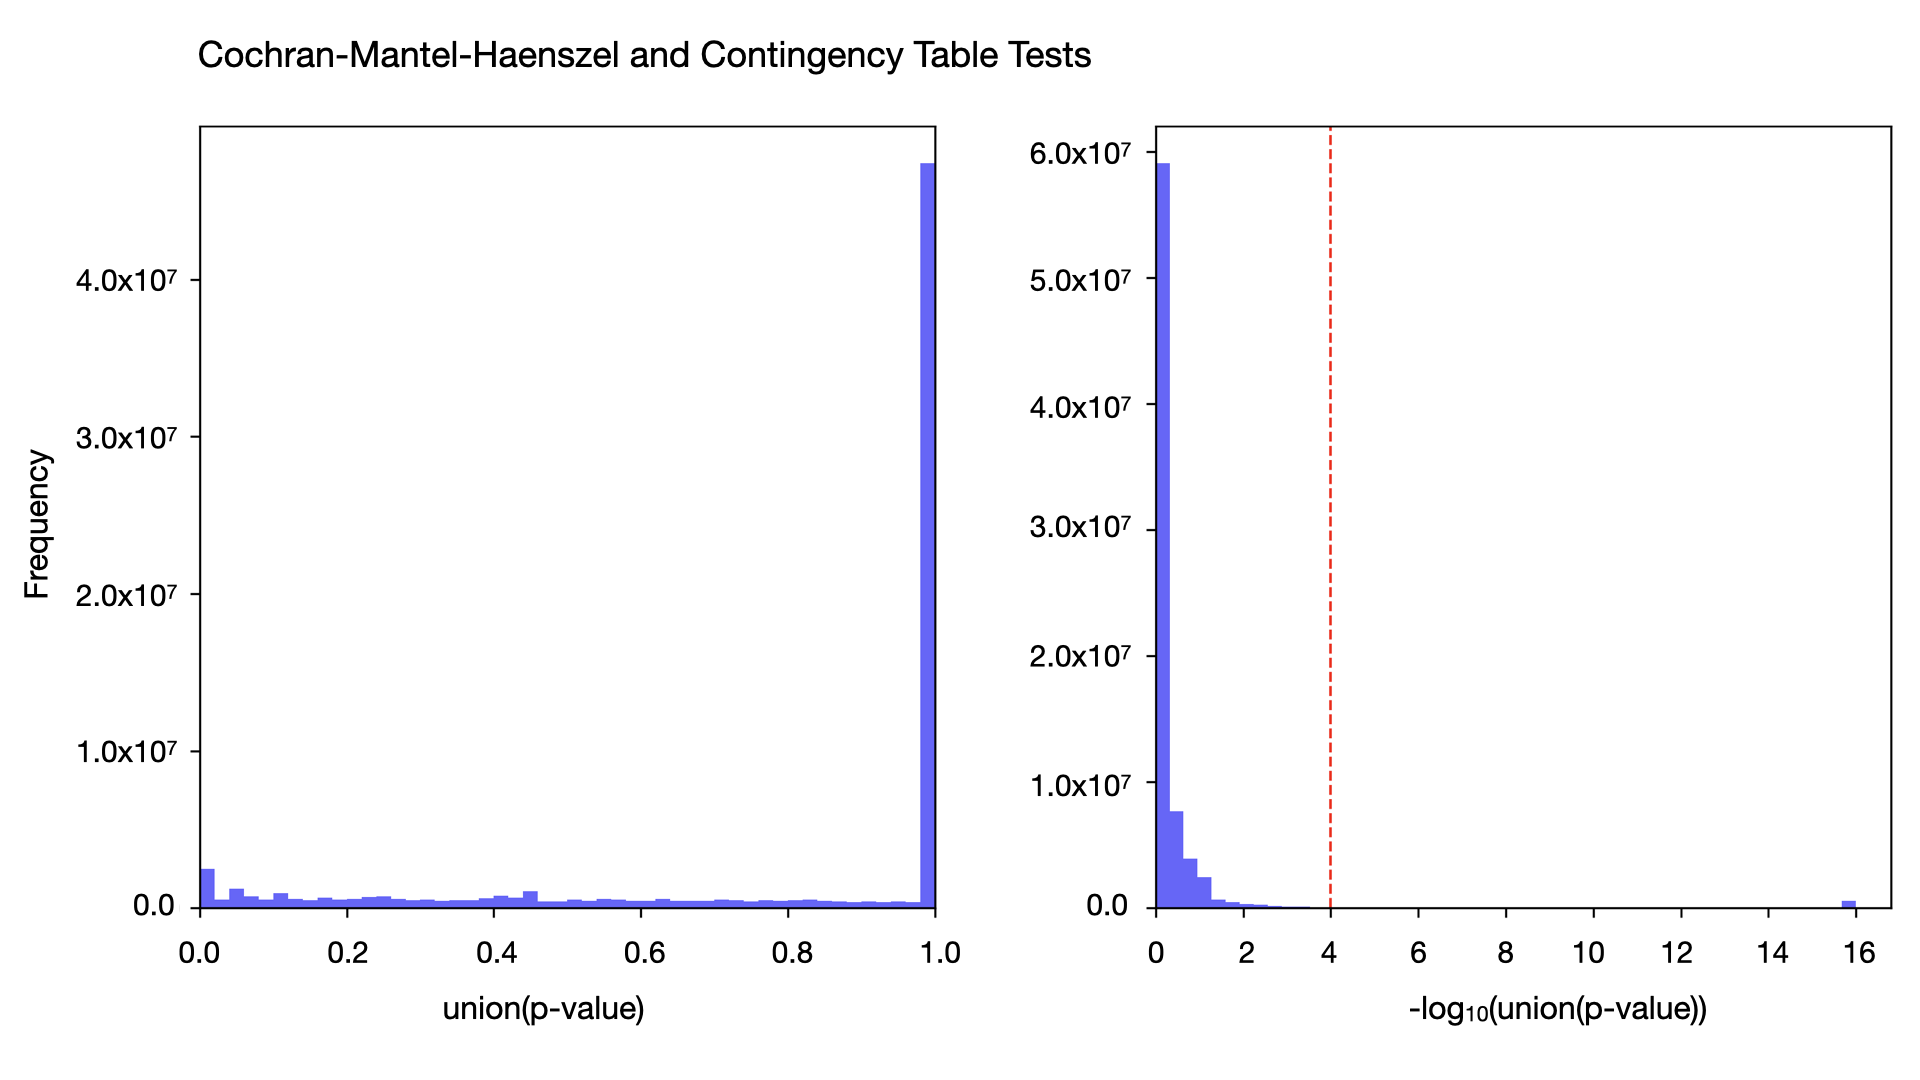 CMH and contingency test p-values